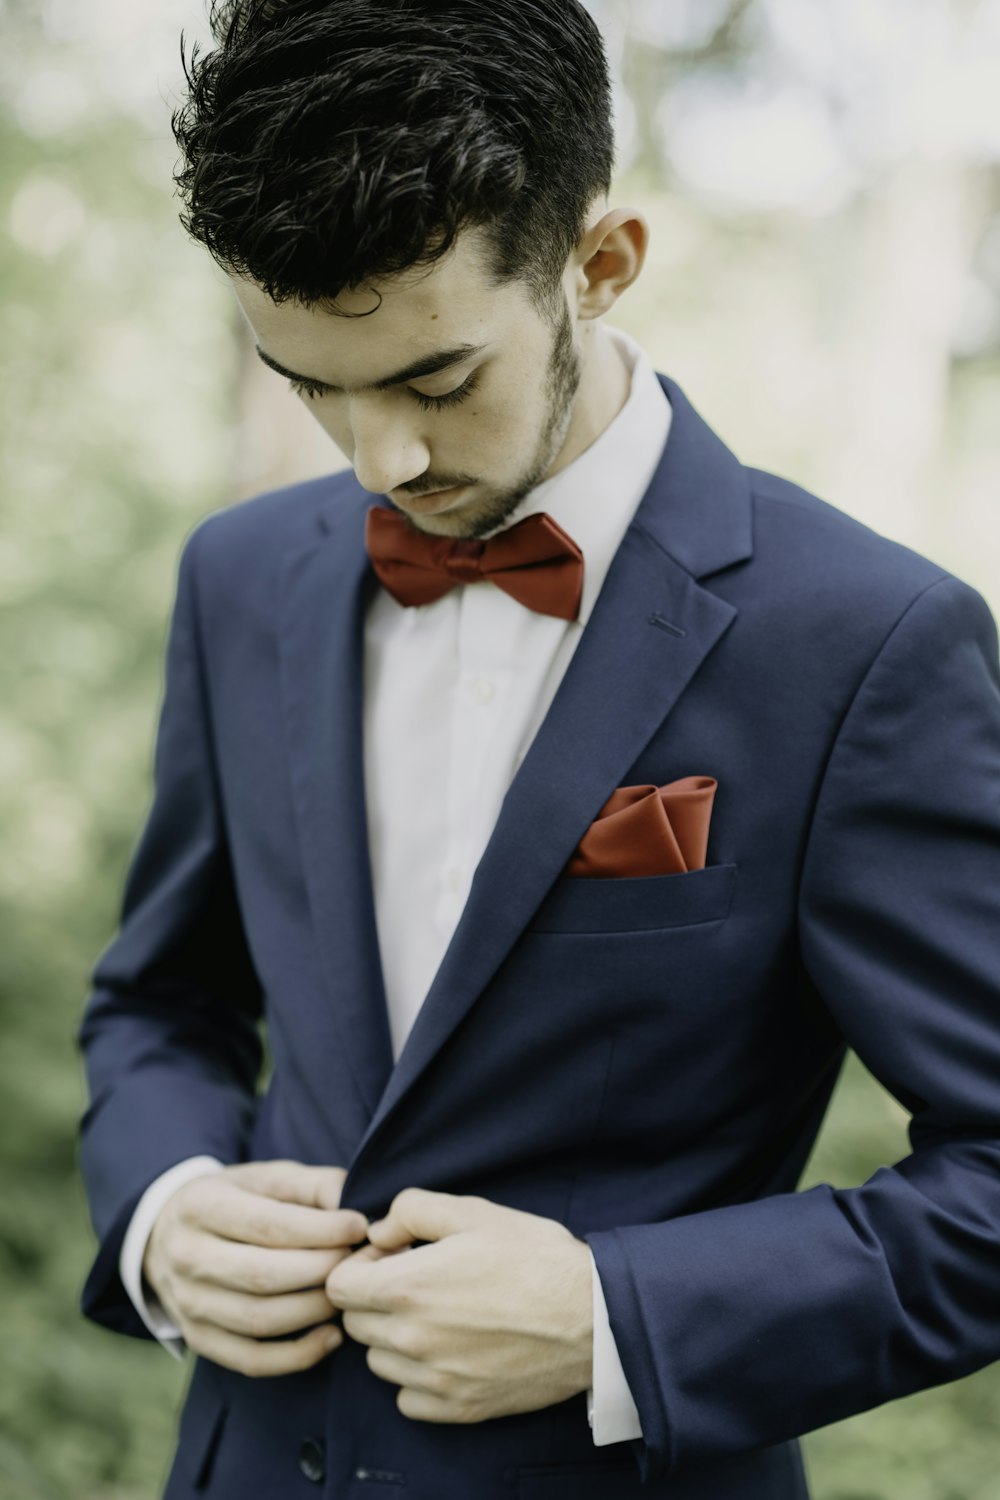 A Man In A Blue Suit With A Red Bow Tie Photo – Free Suit Image On Unsplash